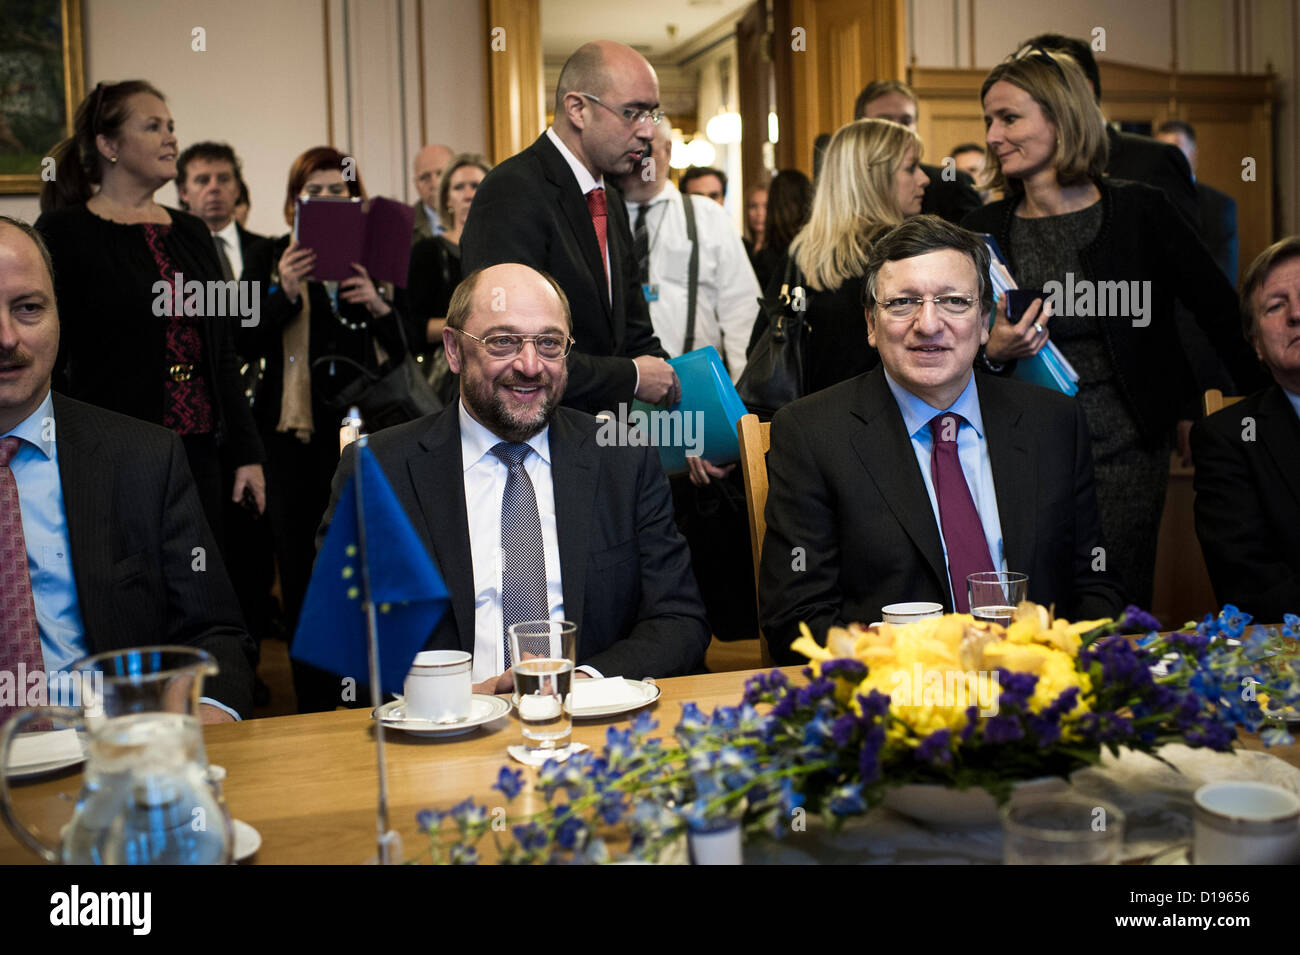 Oslo, Norway. 11/12/2012. Martin Schulz and Jose Manuel Barrosa meets the President of the Storting, Dag Terje Andersen. Credit:  Alexander Widding / Alamy Live News Stock Photo